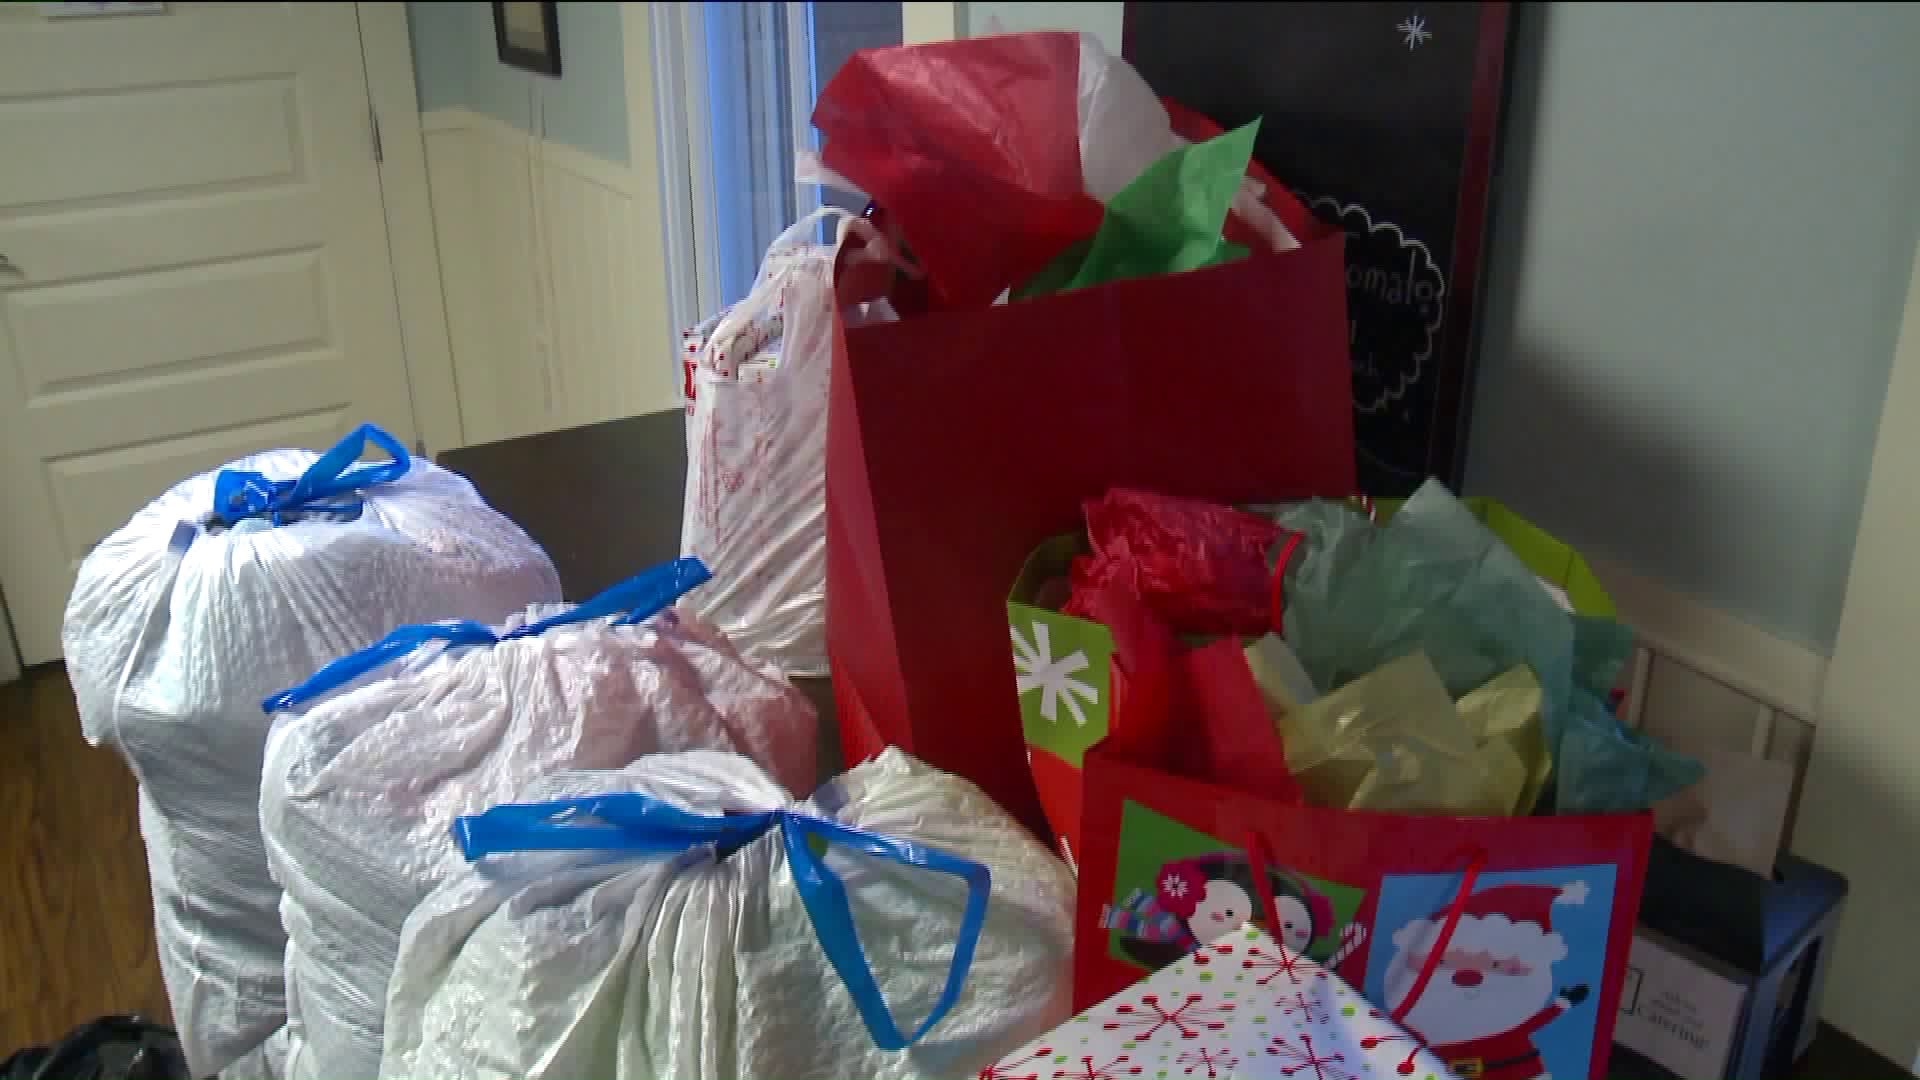 Hebron community comes to the rescue after Grinch steals Christmas gifts